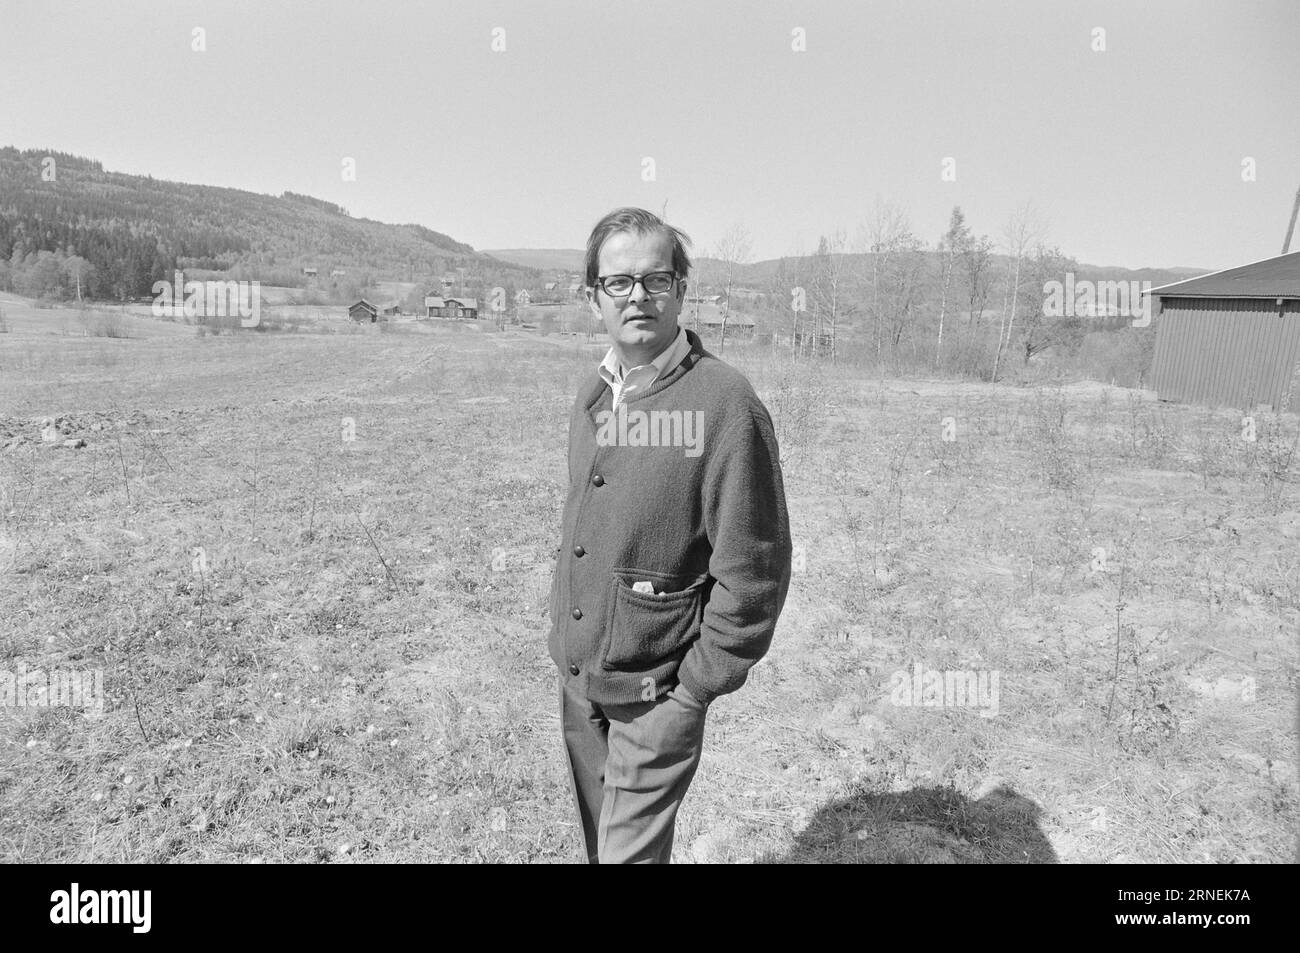 Current 21 - 1974: Løvenskiold Vanskjøtter EarthMost of the world lacks food. But in Norway, more and more arable land is going out of business. In Sørkedalen outside Oslo, hundreds of acres of fine topsoil have lain fallow for decades. The land is owned by landowner Harald Løvenskiold. According to Section 53 of the Land Act, the authorities should be able to take the land from him, in order to hand it over to people who want to cultivate it and produce more food.  Estate owner Harald Løvenskiold — now also as a land vandal, photographed in the middle of his own work of destruction in Sørkeda Stock Photo